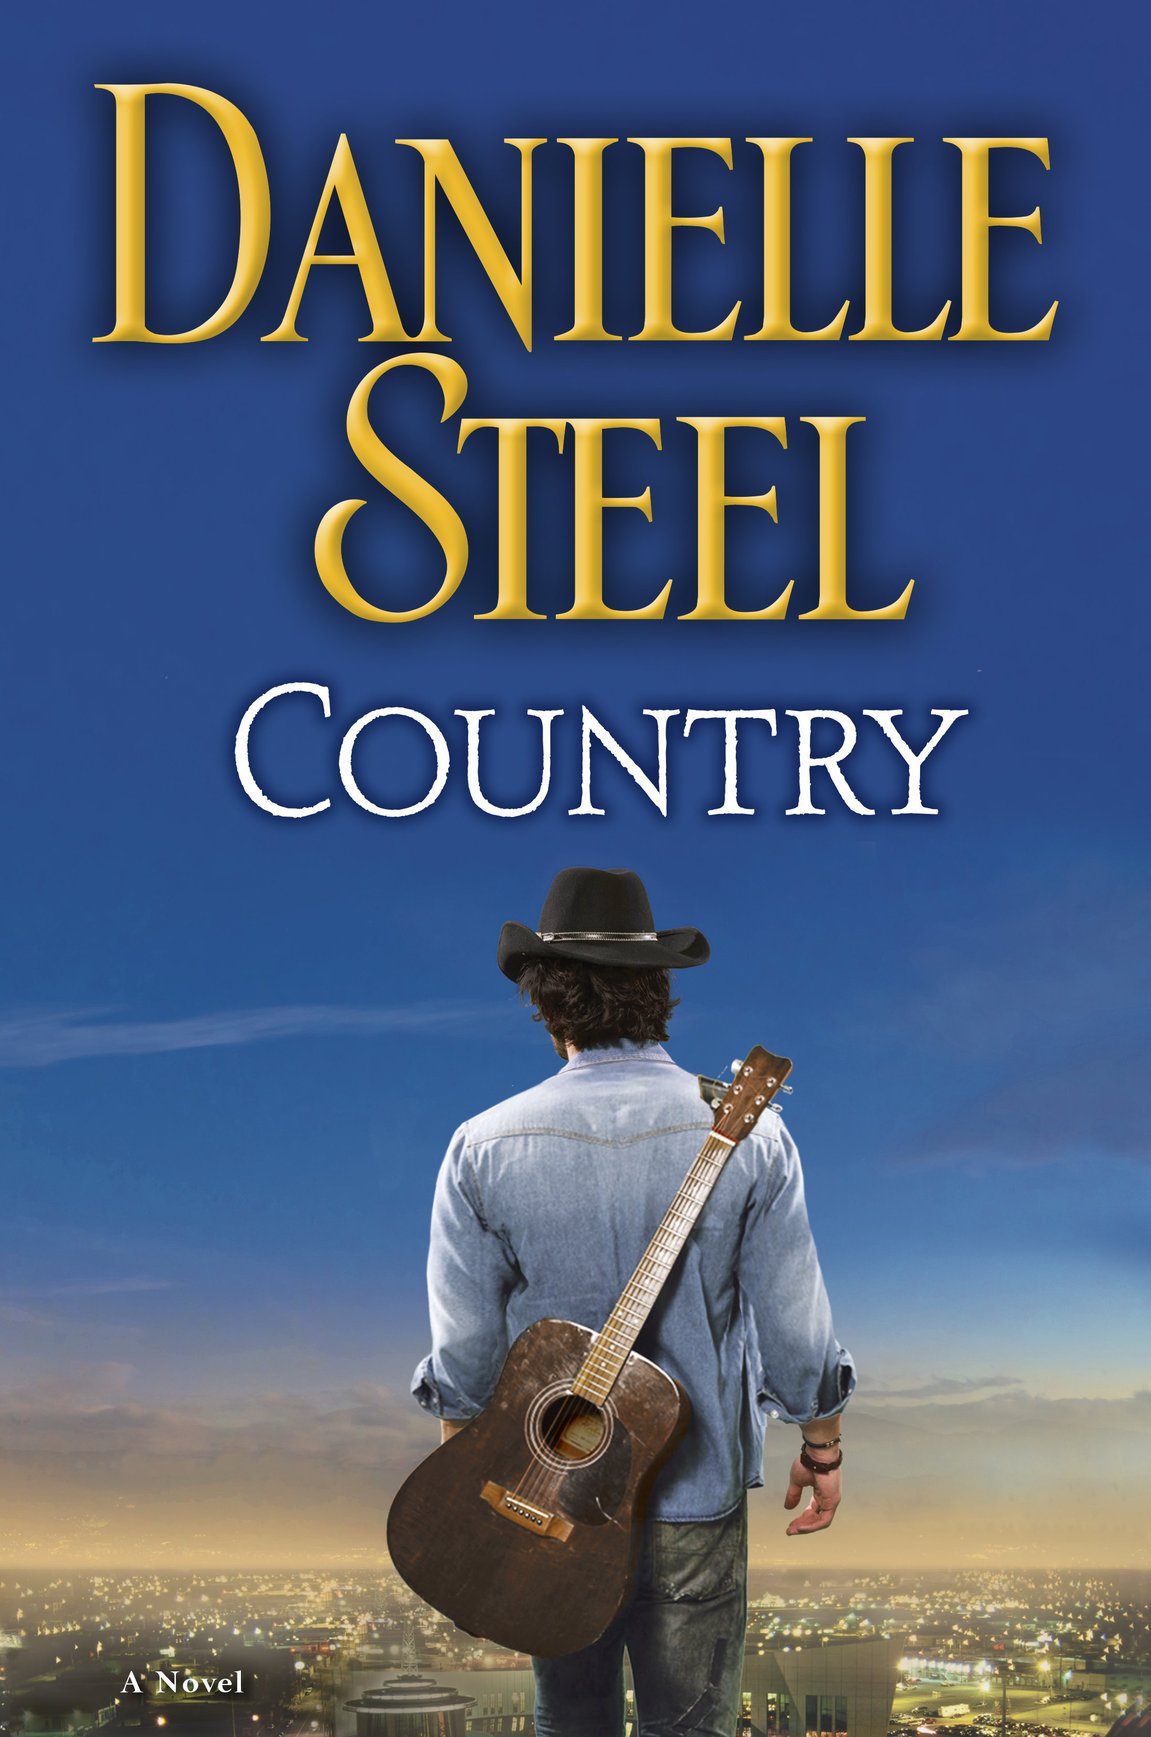 Country (2015) by Danielle Steel